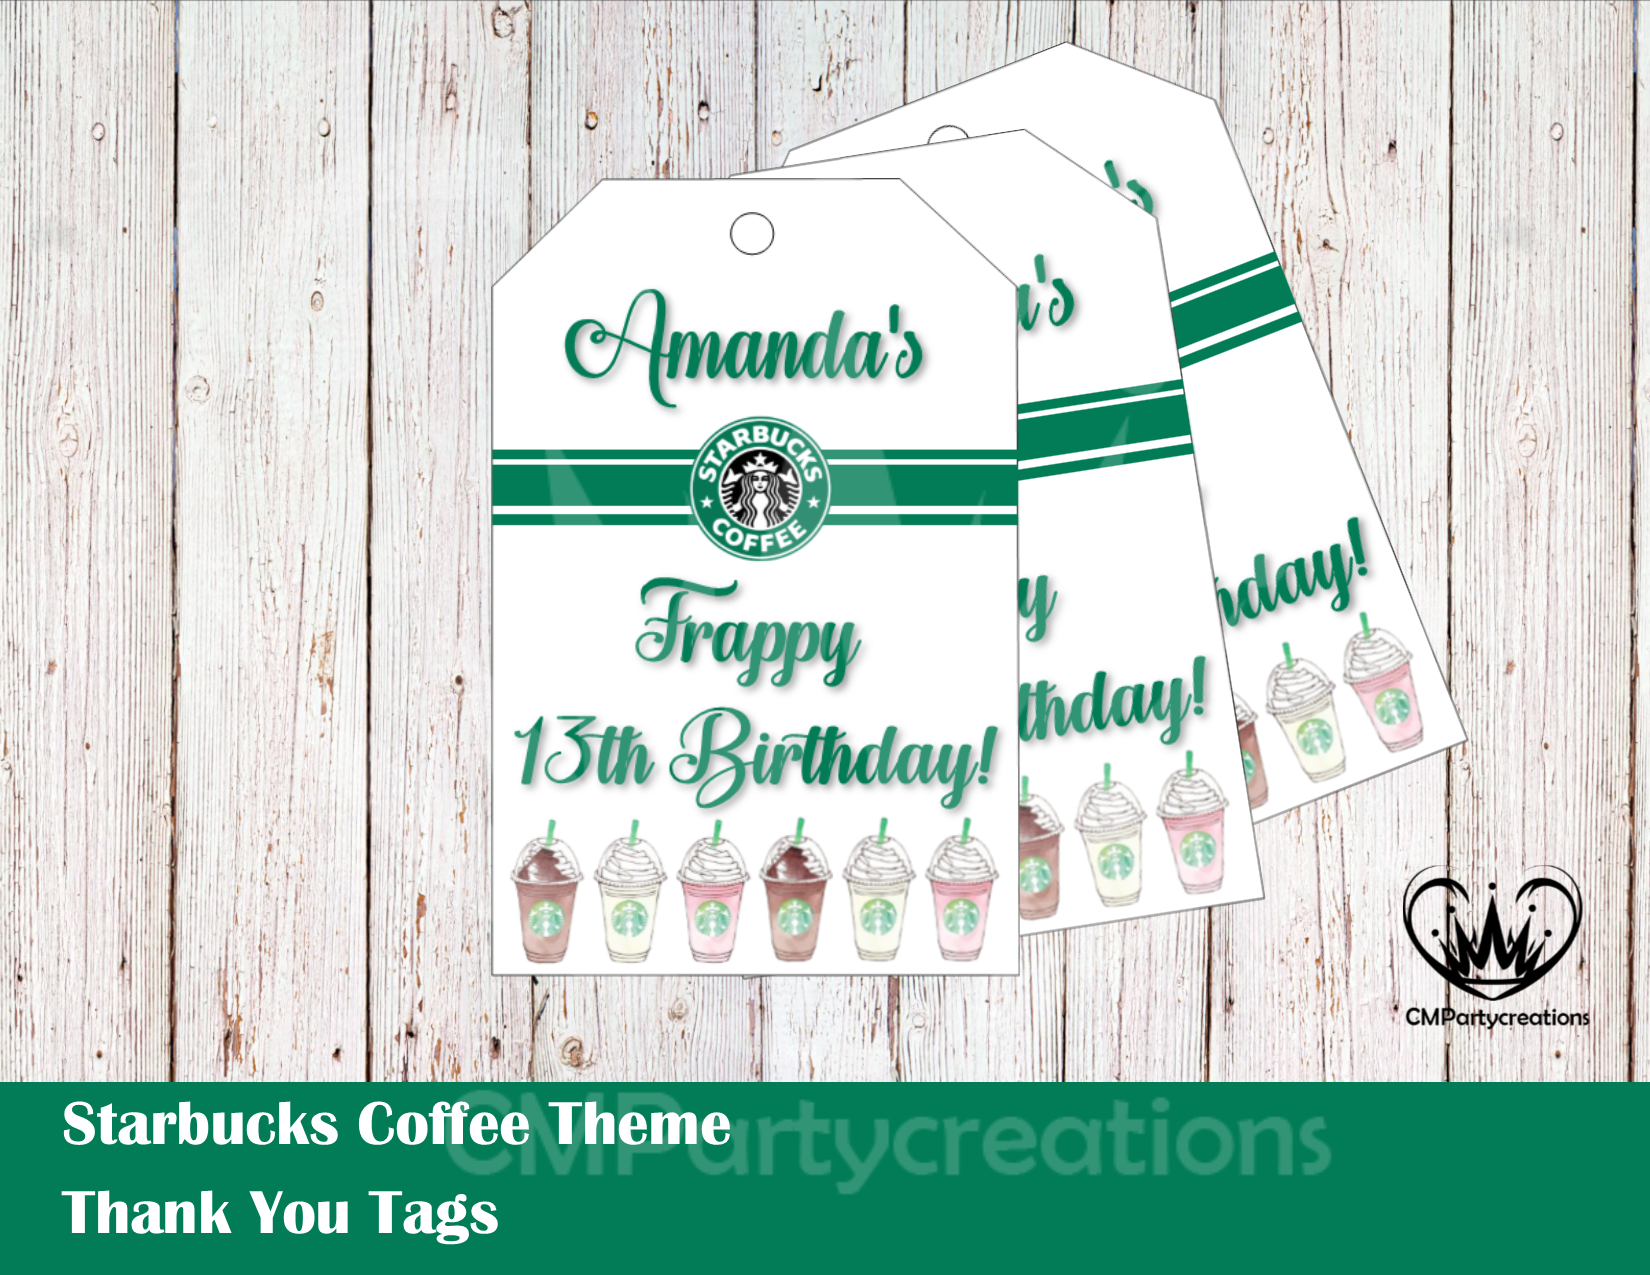 Starbucks Personalized Thank You s Cmpartycreations